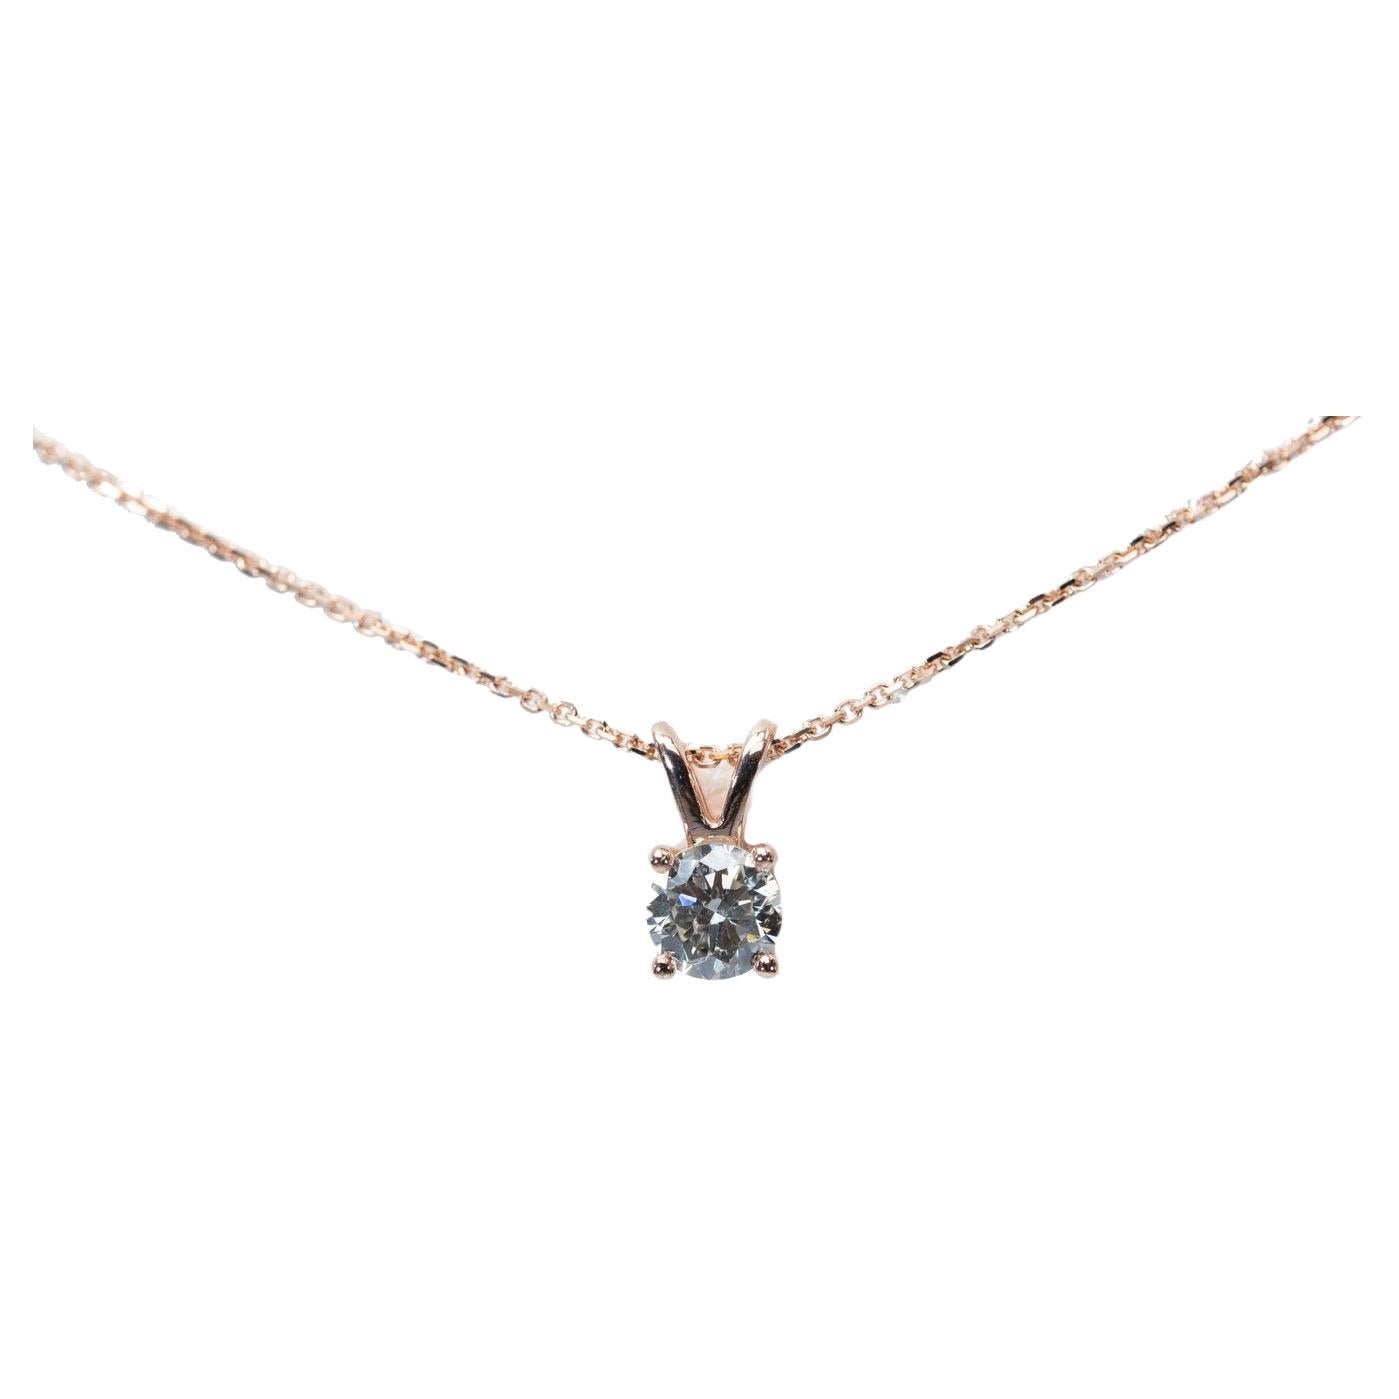 Gorgeous 18k Rose Gold Necklace & Pendant with 0.8ct Natural Diamond GIA Cert